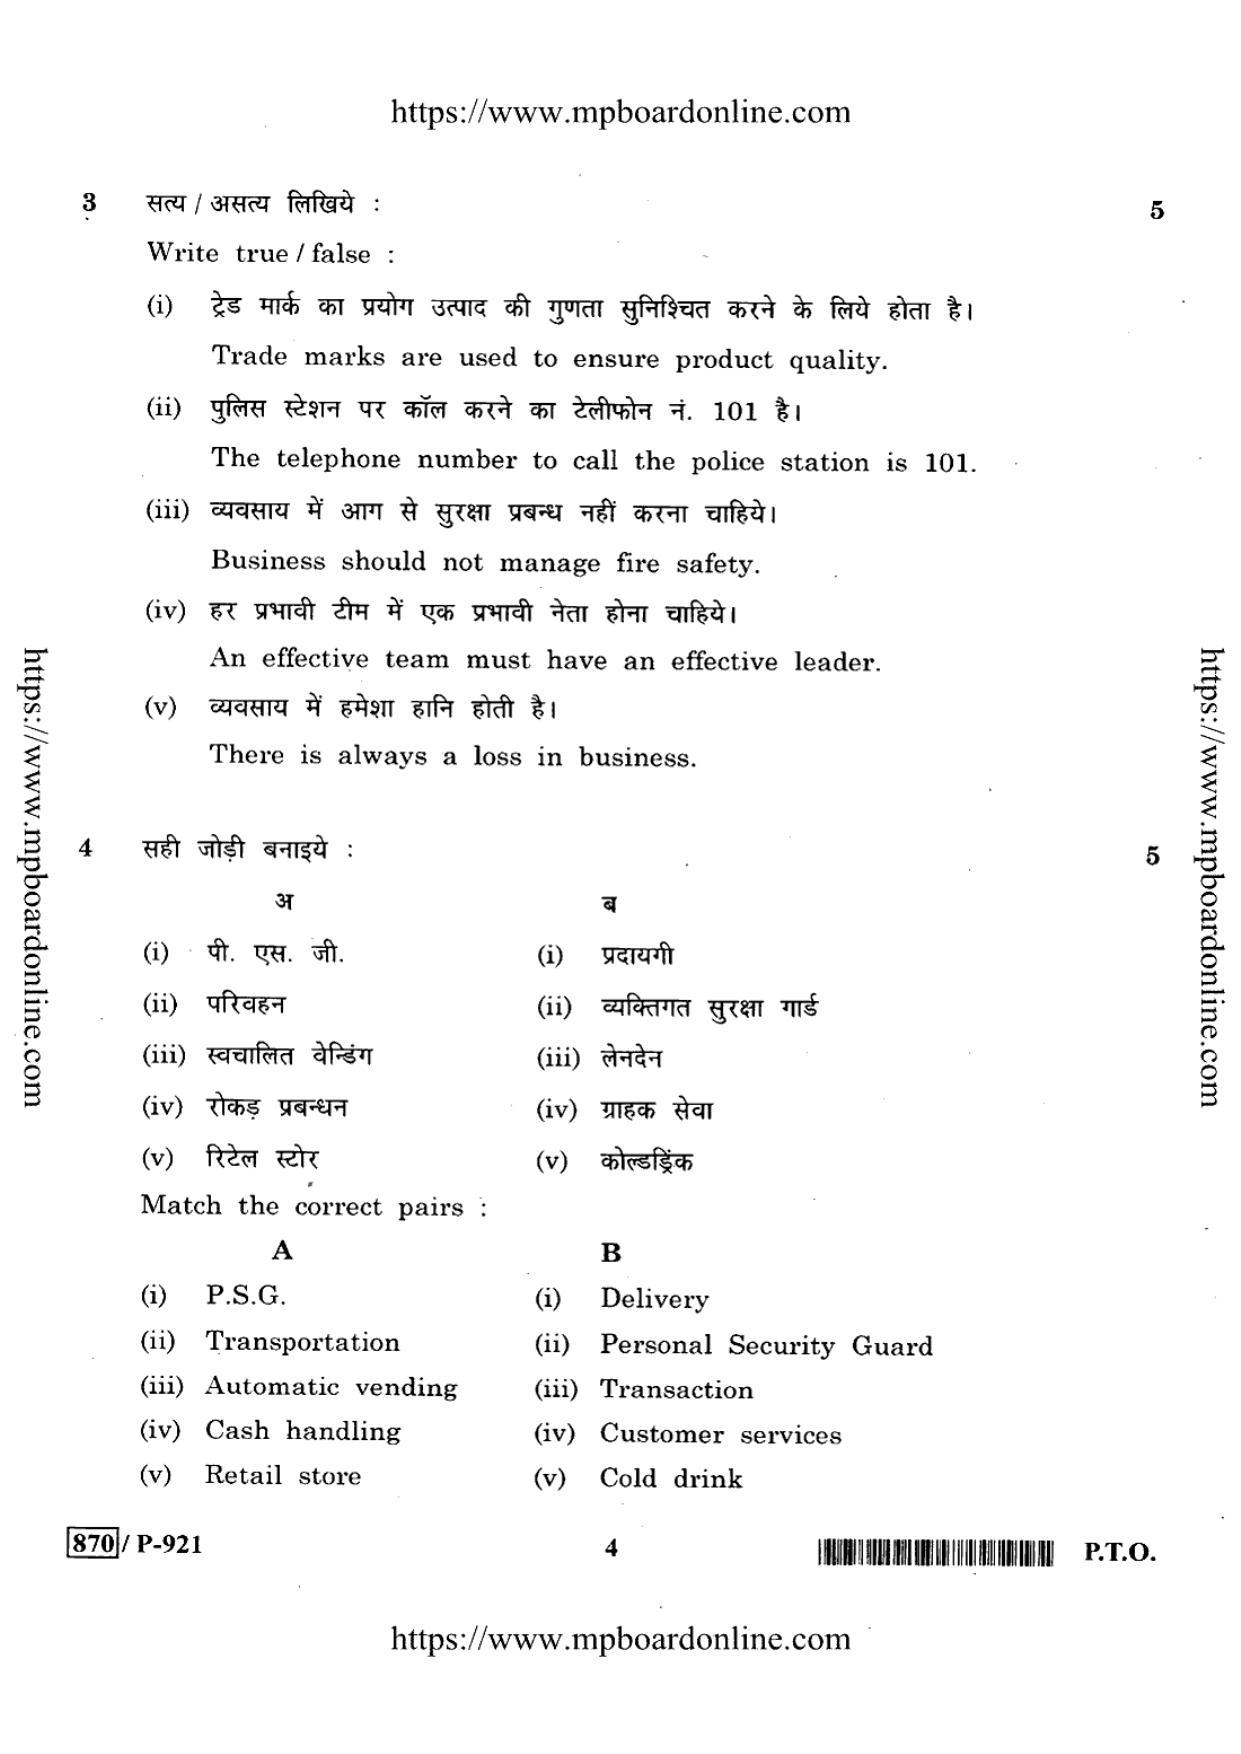 MP Board Class 10 Retail 2020 Question Paper - Page 4